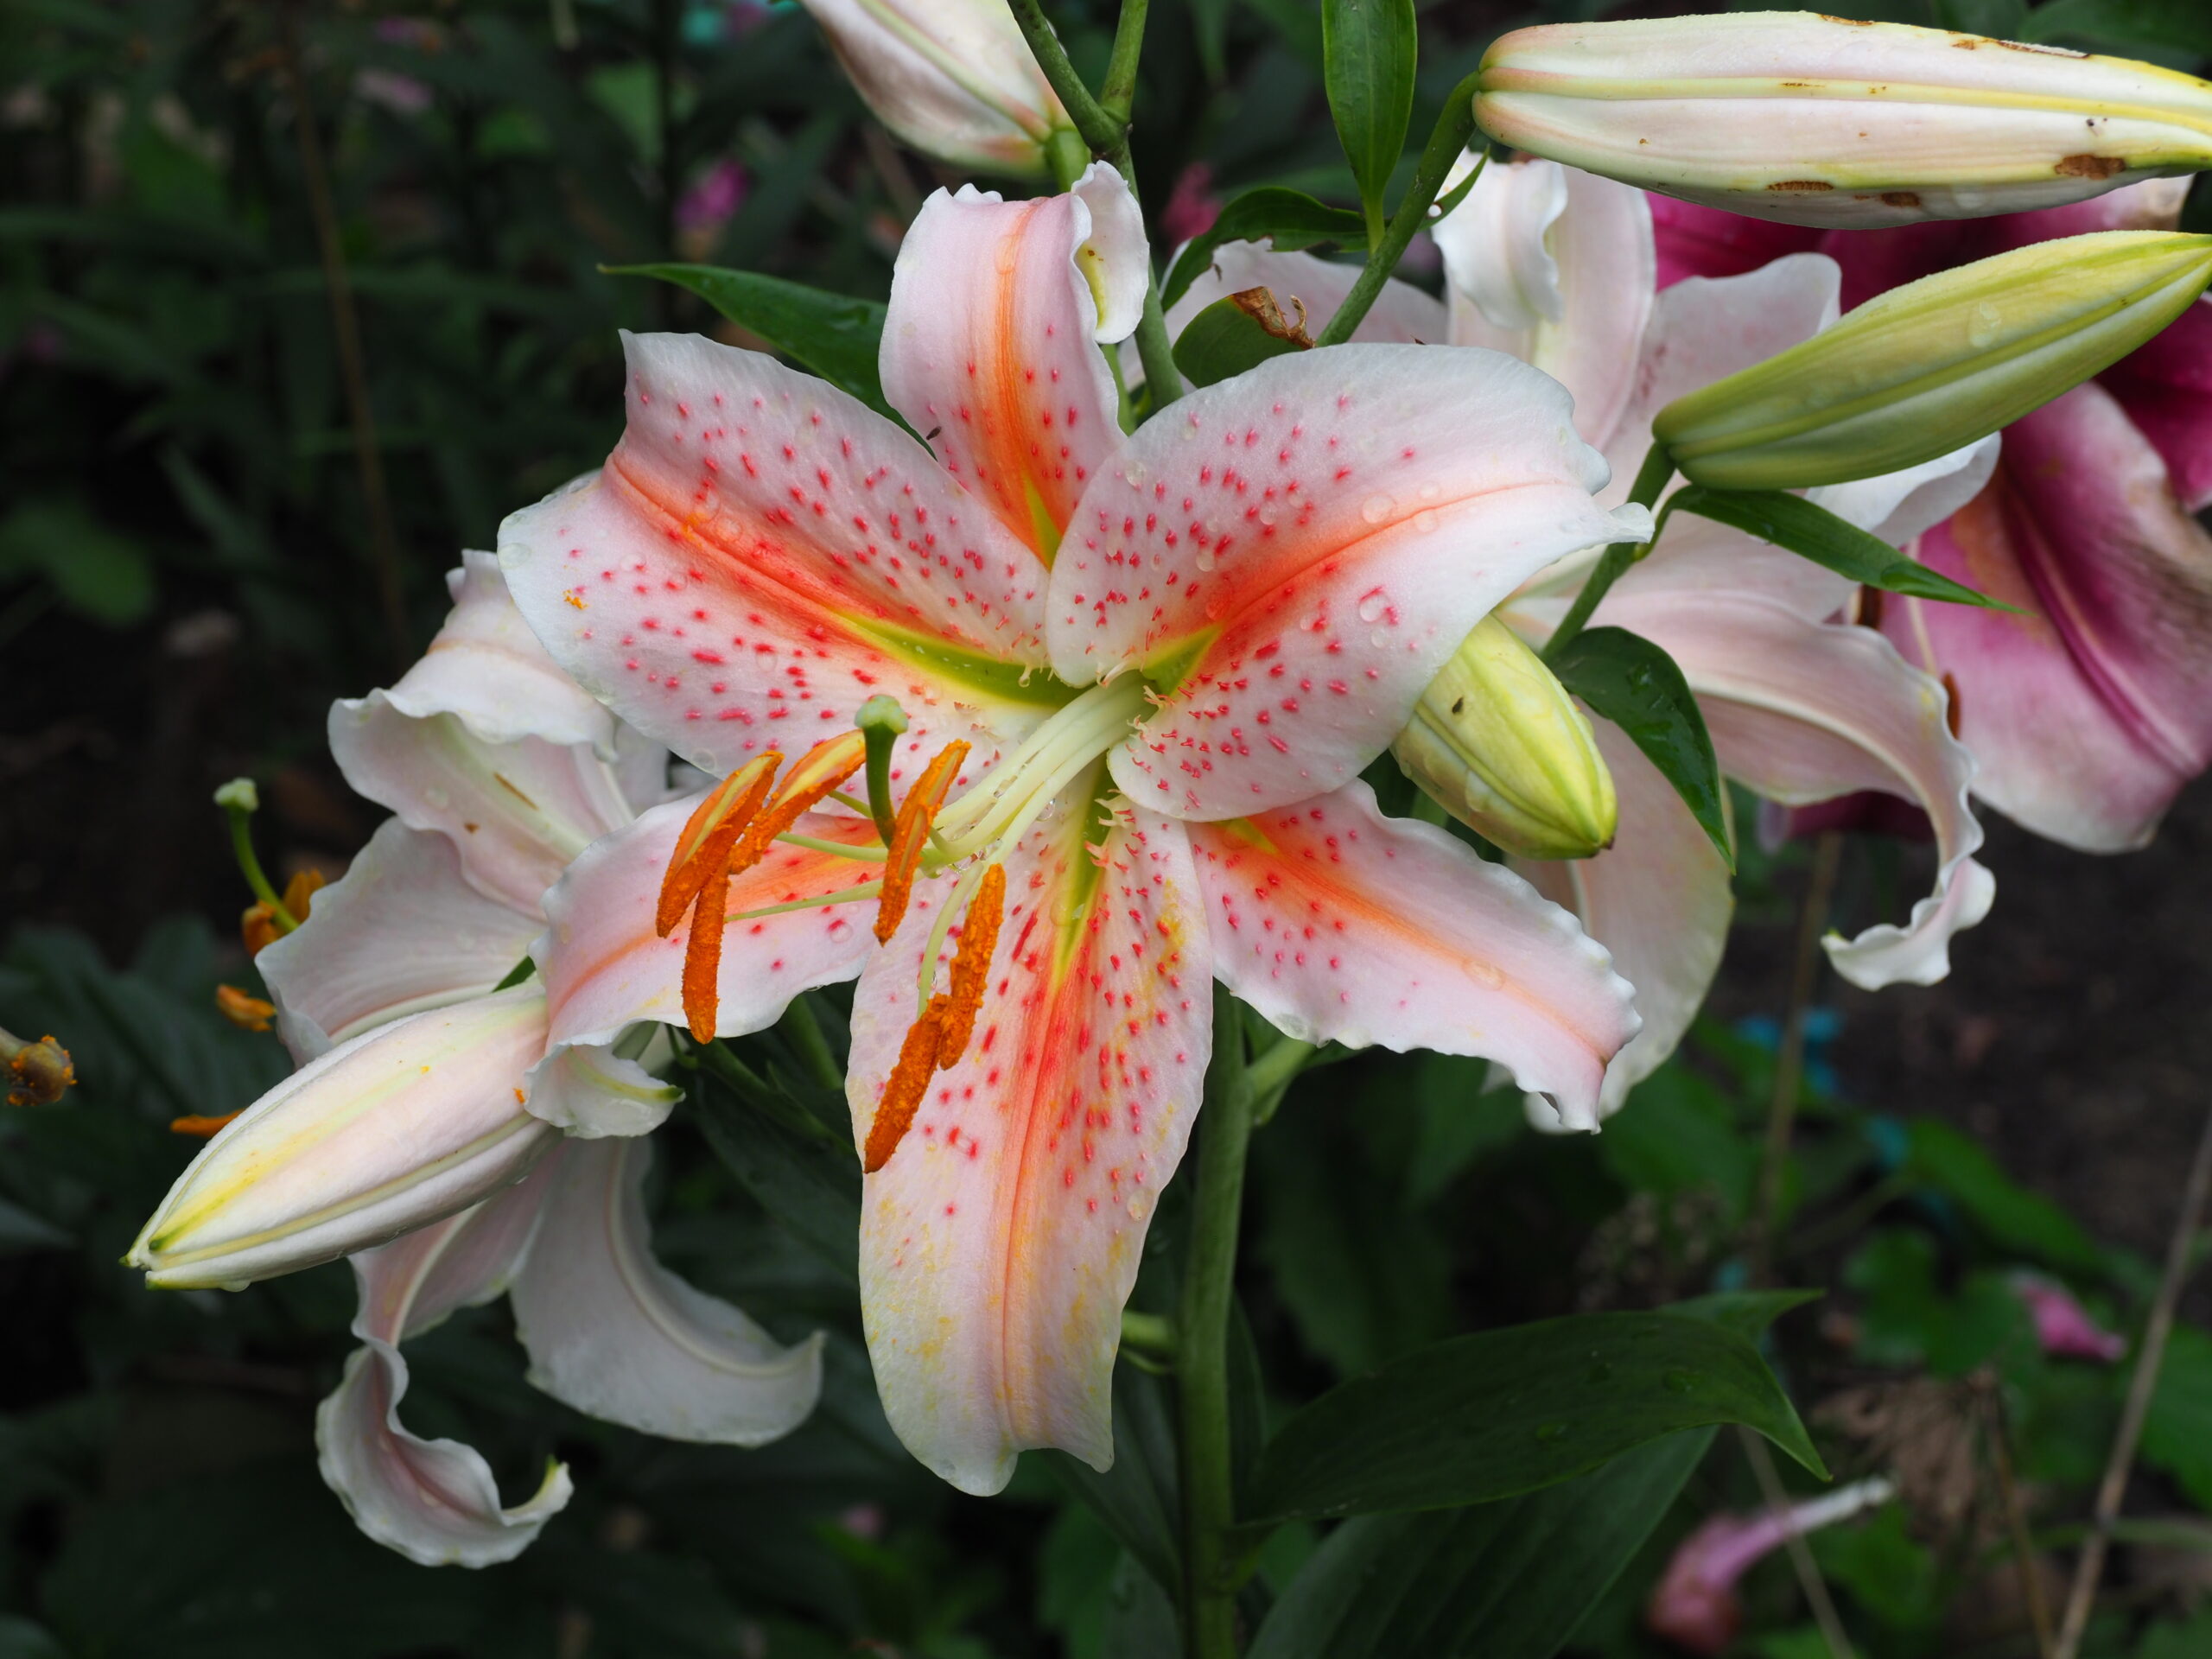 The oriental hybrid lily Salmon Star has wonderful colors and just as wonderful scent. ANDREW MESSINGER